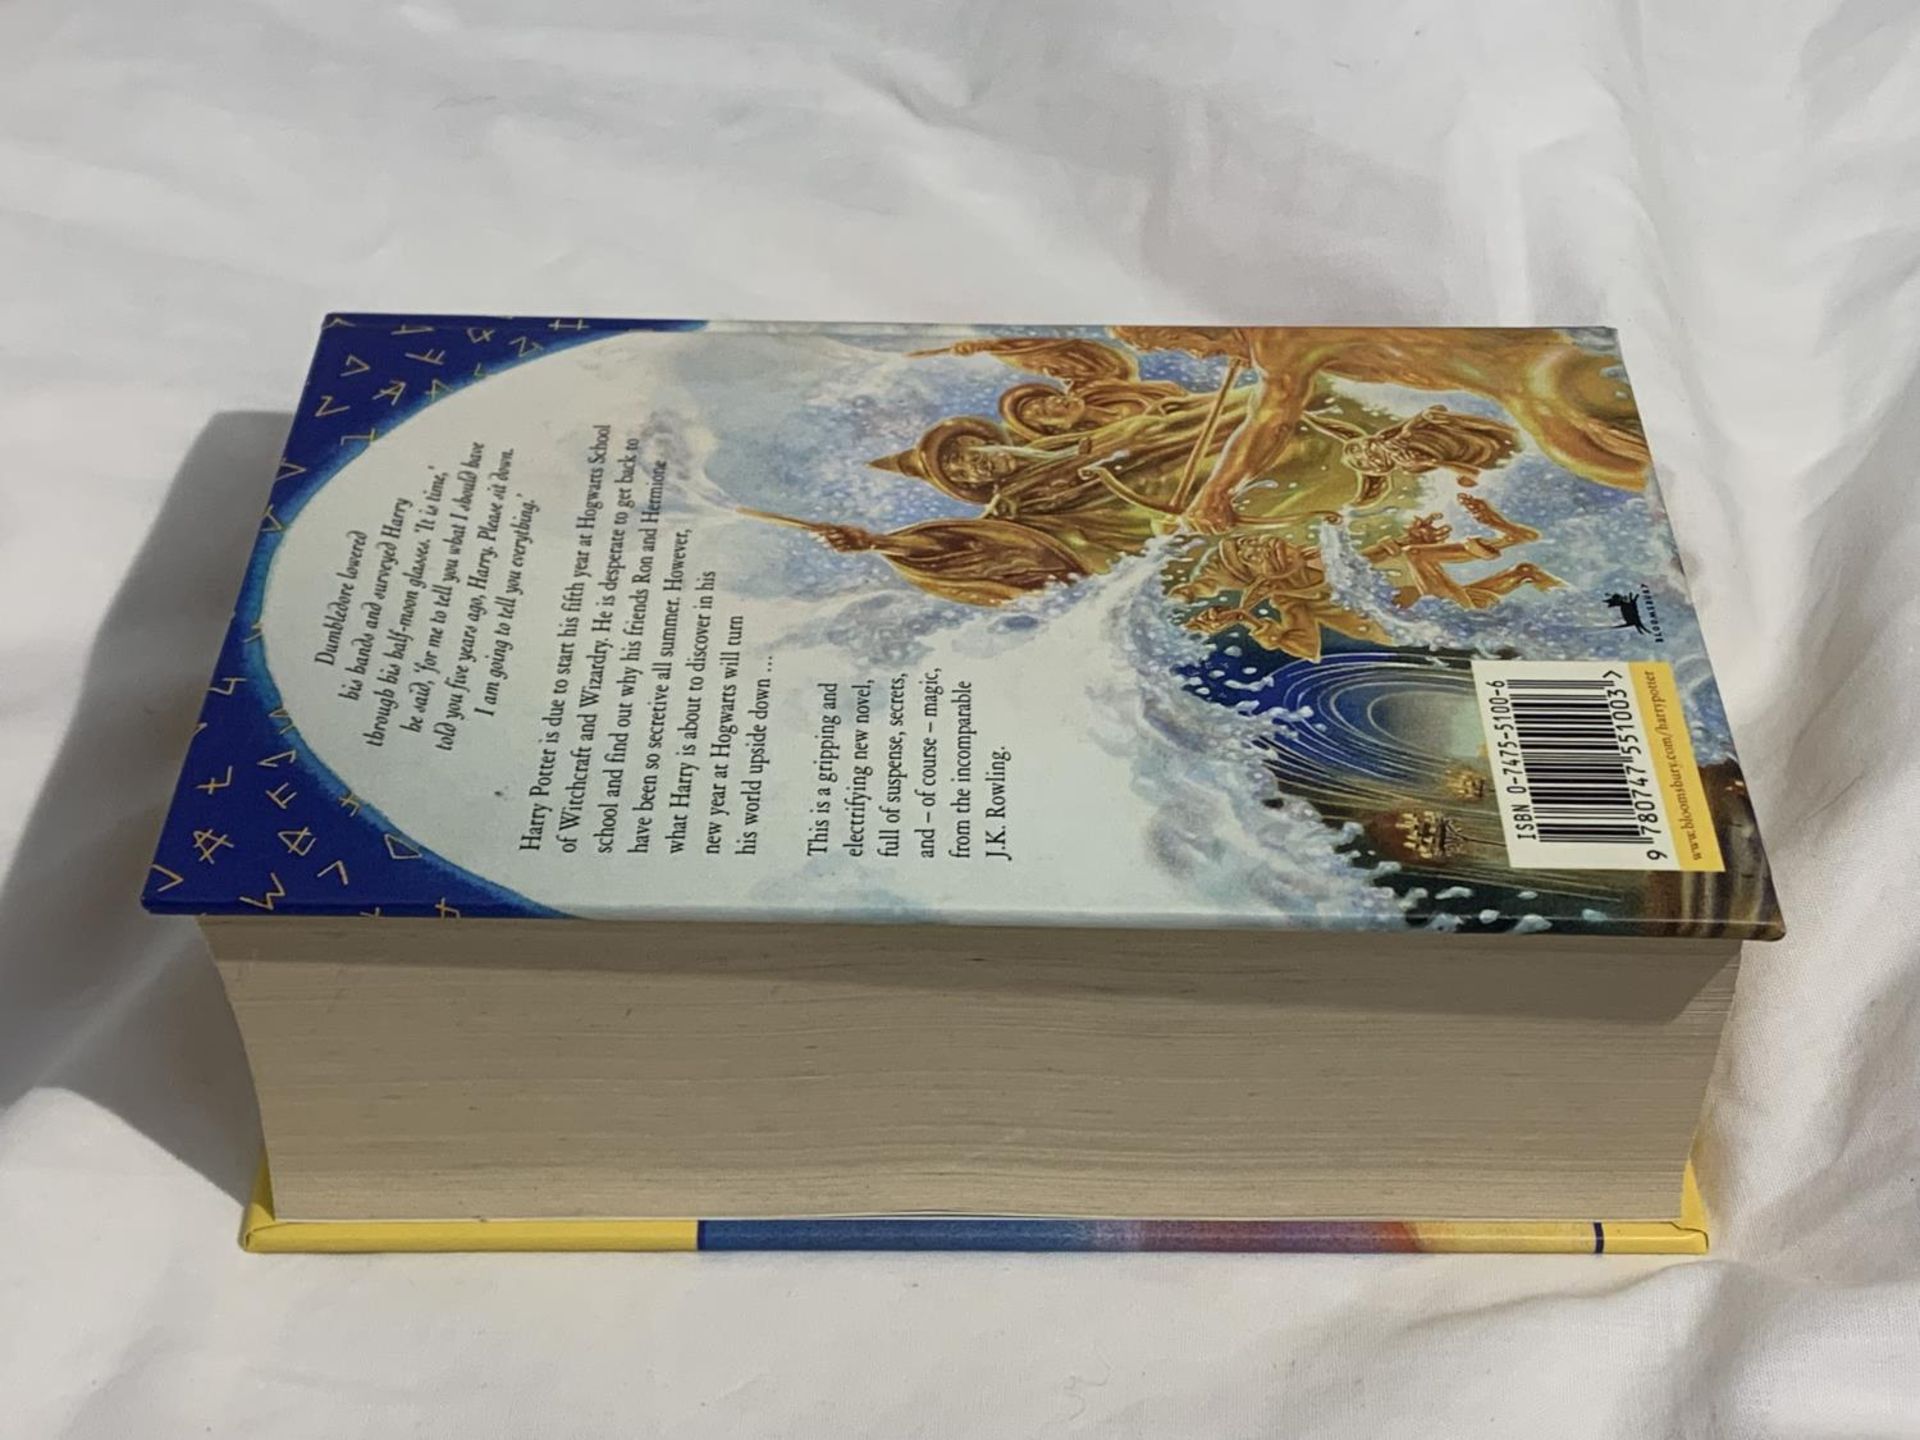 A HARDBACK FIRST EDITION - HARRY POTTER AND THE ORDER OF THE PHOENIX, NO DUST JACKET BY J.K. - Image 4 of 5